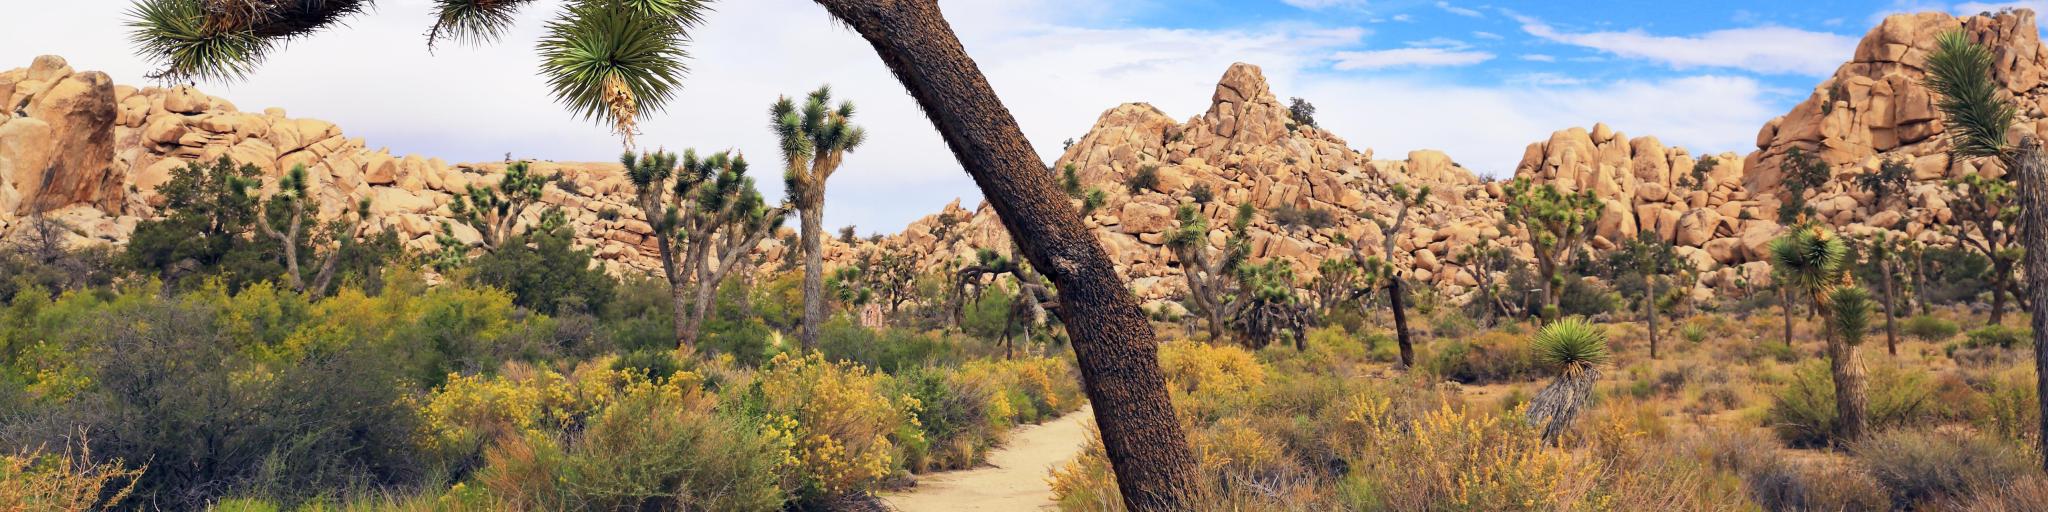 Joshua Tree National Park, USA with beautiful foliage of a Joshua tree and rocks in the distance.